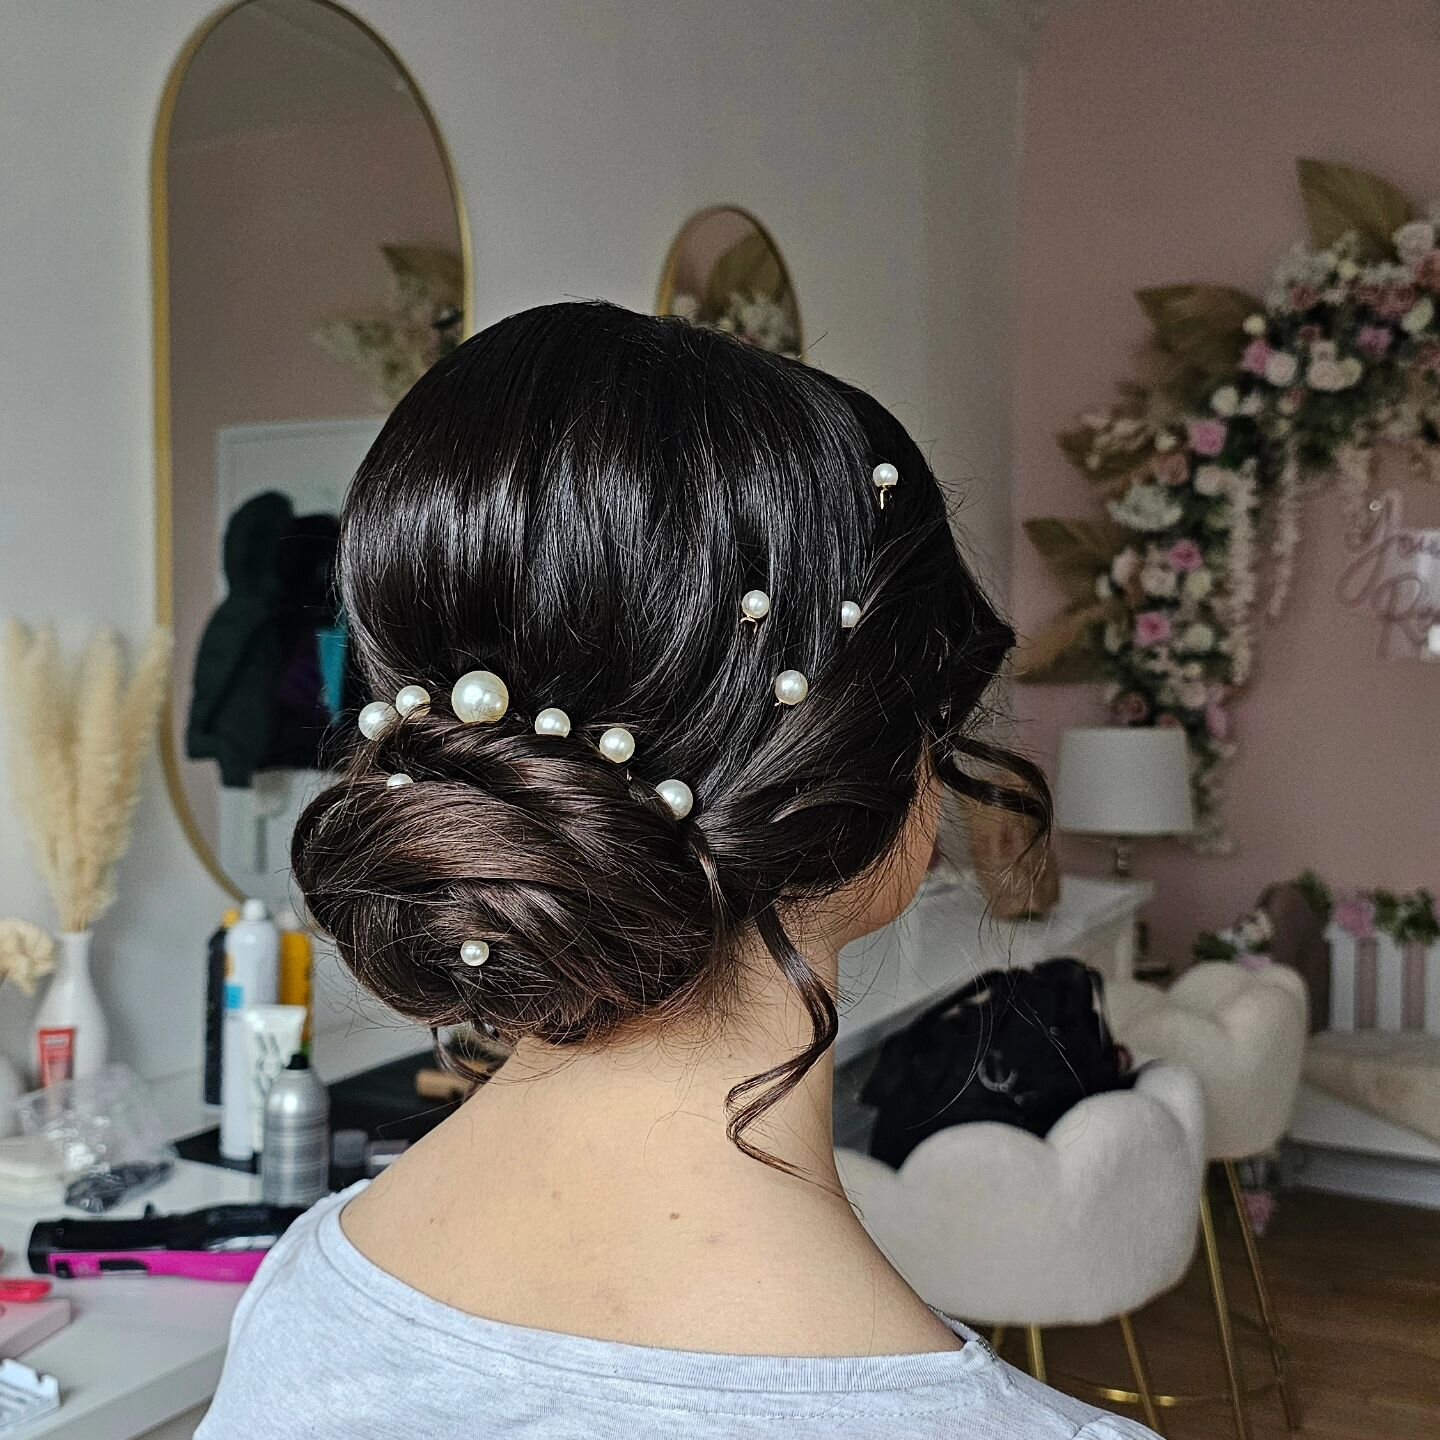 Updos will never go out of style 🤩

Hair by Donna 
@beautyhauscollective 

#beautyhauscollective #beautyhaustoronto #beautyhausteam #beautyhausbride